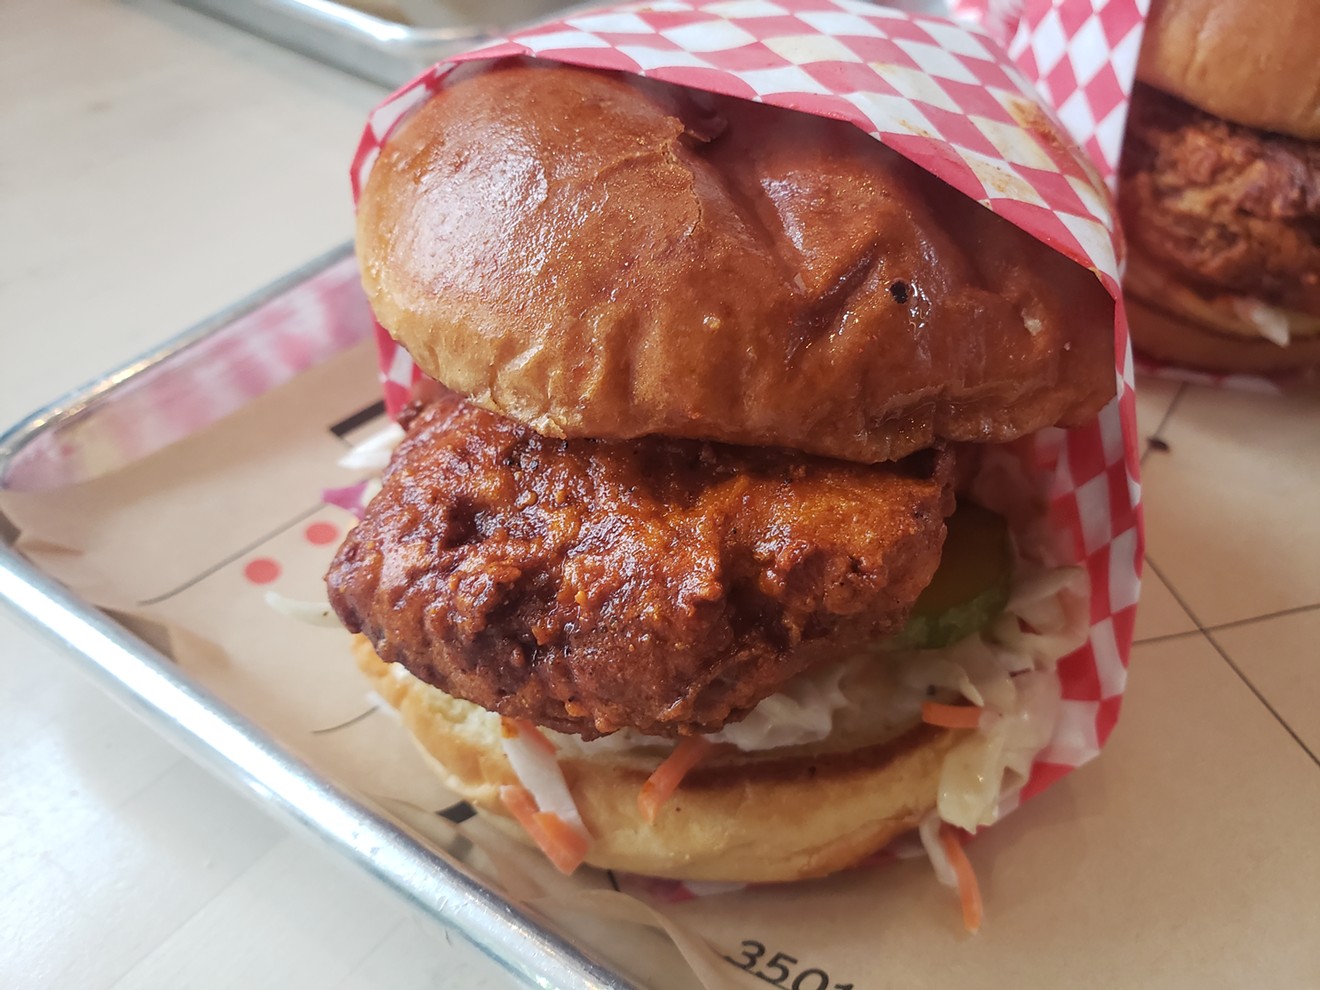 The Budlong's chicken sandwiches are temporarily offline, but will soon return in a new location